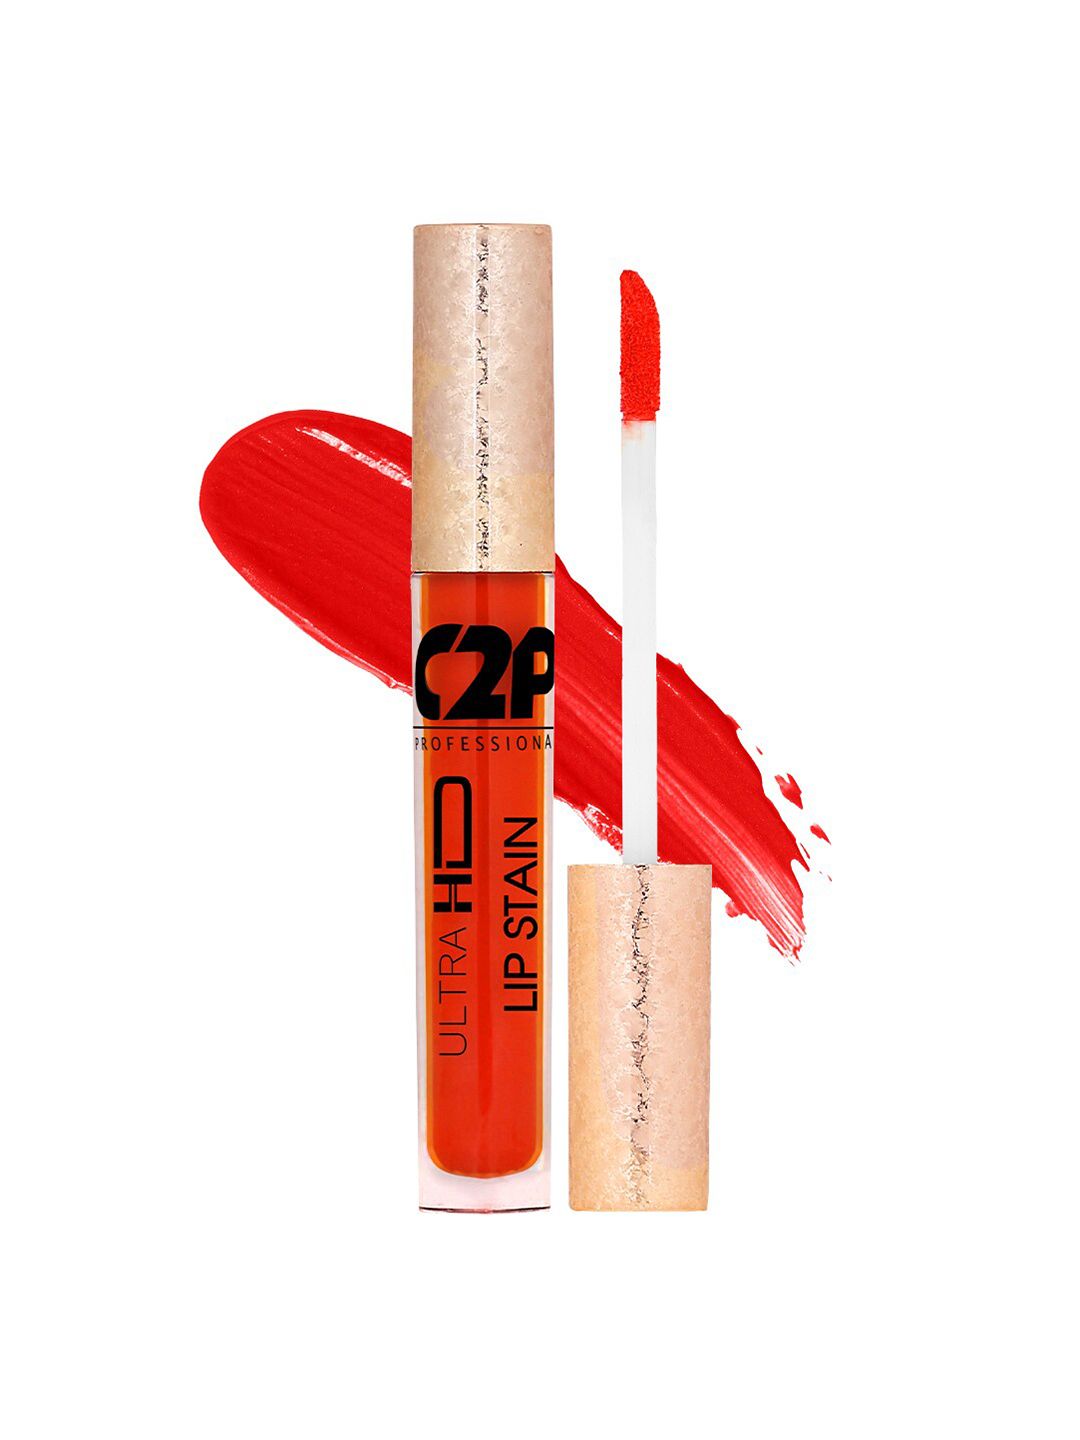 C2P PROFESSIONAL MAKEUP Lip Stain Liquid Lipstick - Downtown Red 29 5ml Price in India